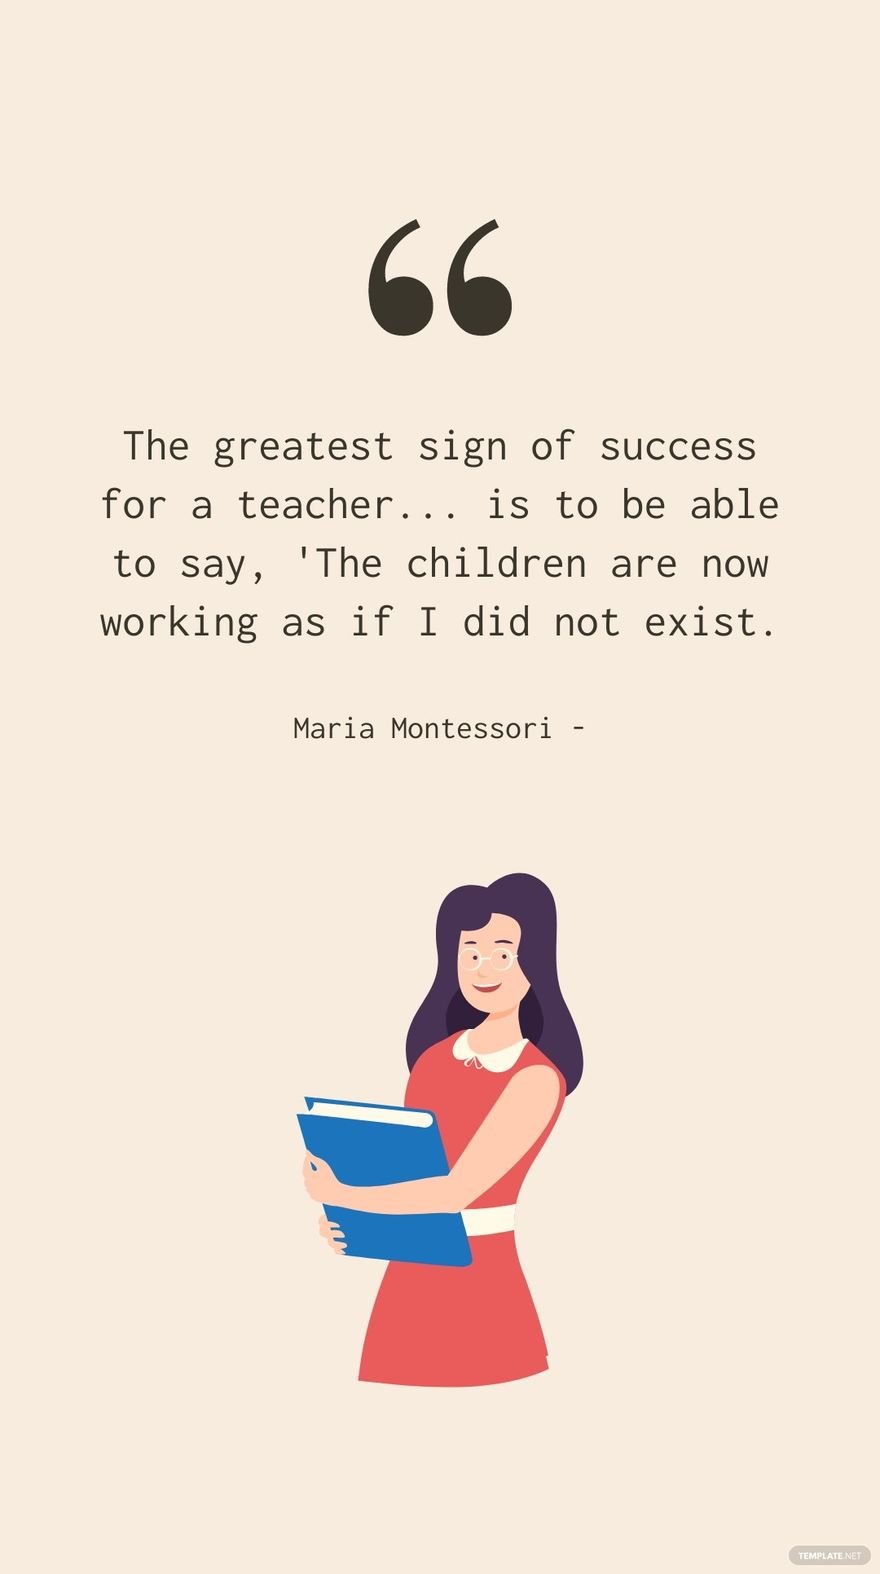 Free Maria Montessori - The greatest sign of success for a teacher... is to be able to say, 'The children are now working as if I did not exist.' in JPG